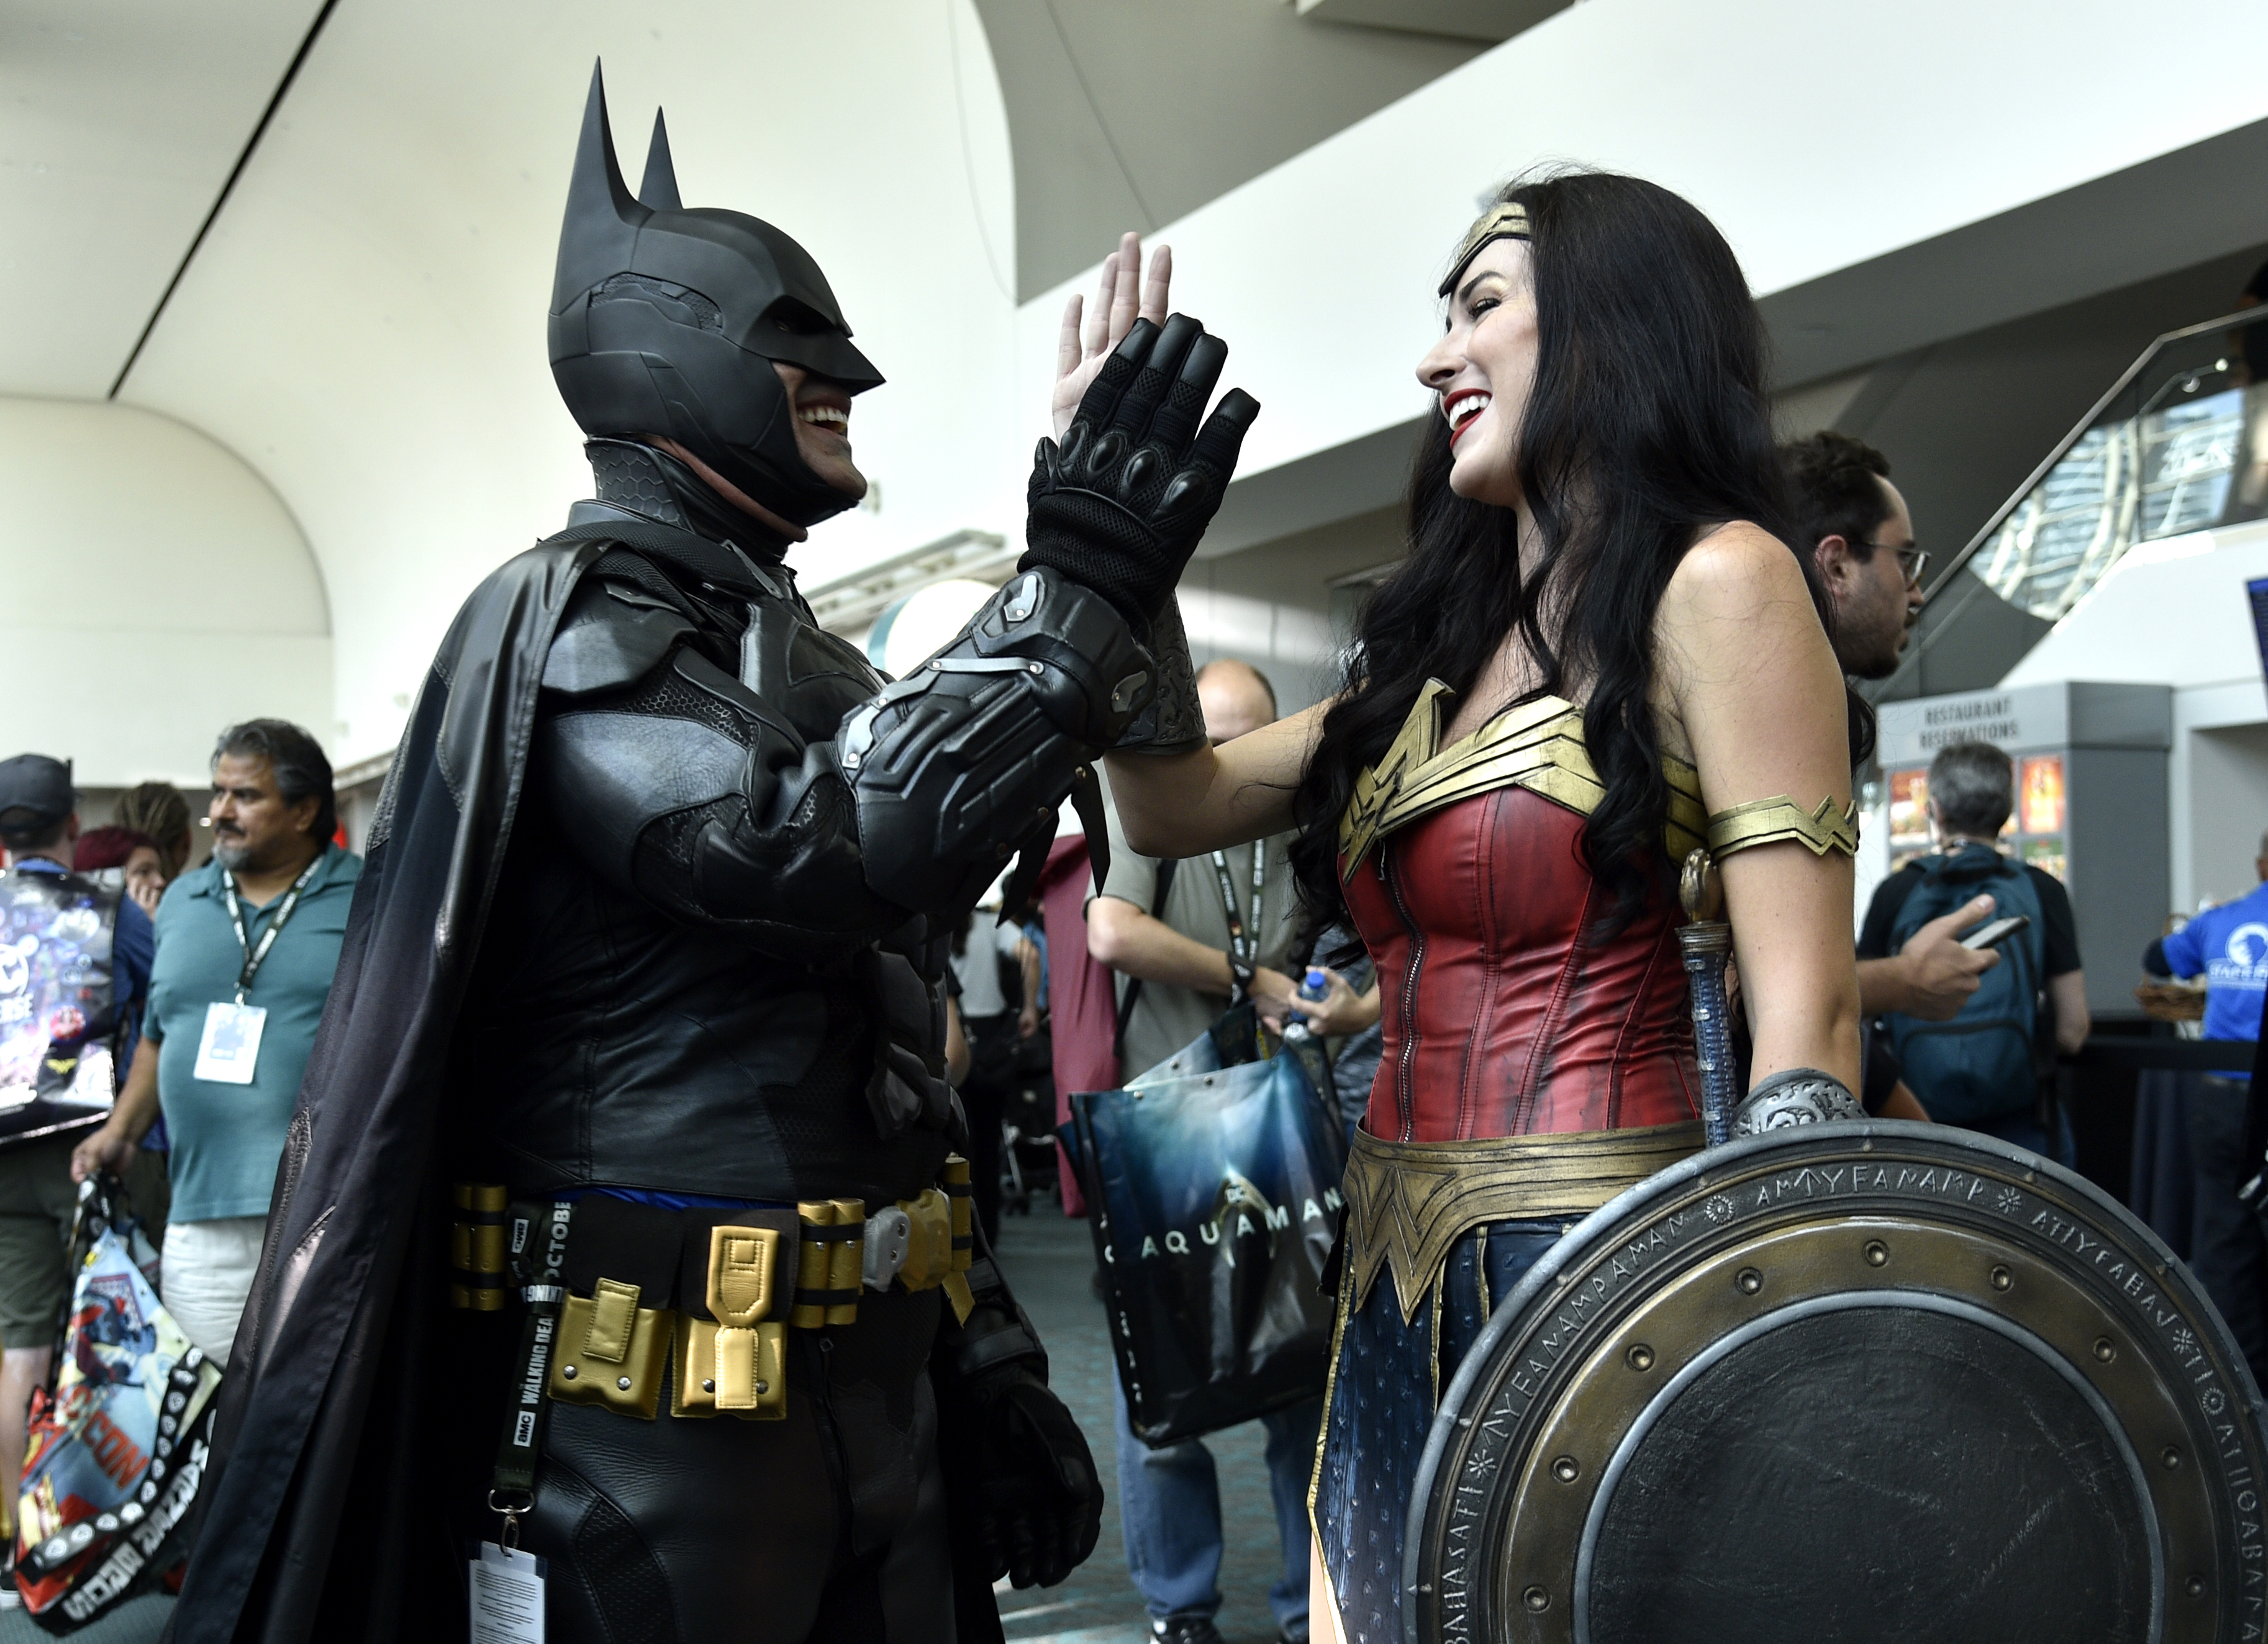 Armando Abarca, left, dressed as Batman, and Jessica Rose Davis, dressed as Wonder Woman, of Los Angeles, high five each other as they attend day one of Comic-Con International on Thursday, July 19, 2018, in San Diego.(Photo by Chris Pizzello/Invision/AP)